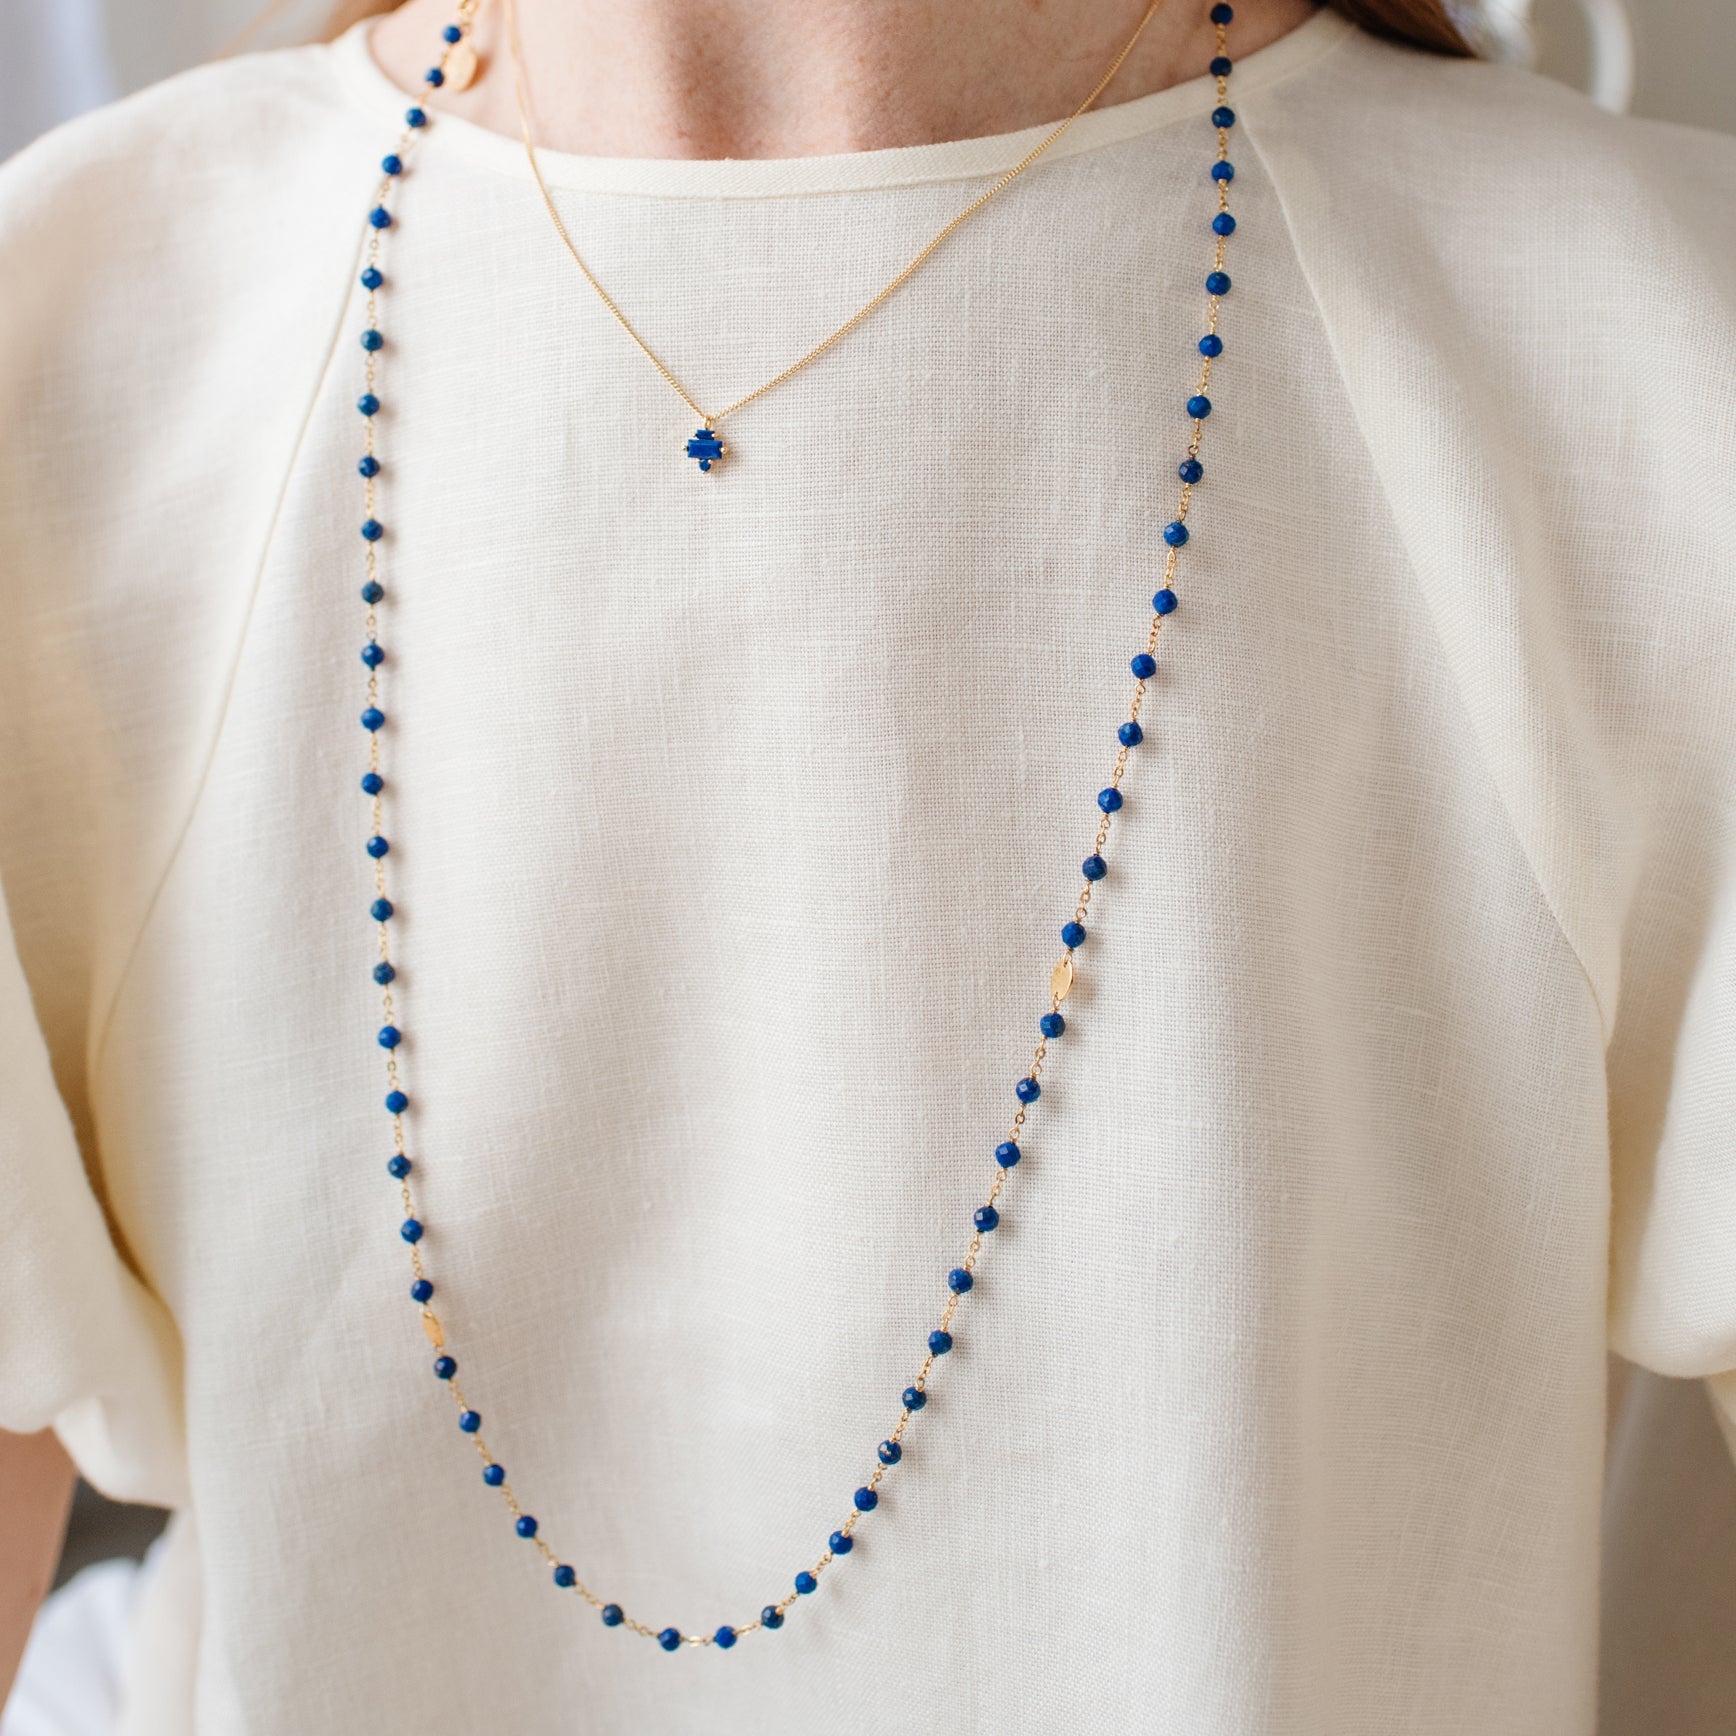 ICONIC LONG BEADED NECKLACE - LAPIS & GOLD 34" - SO PRETTY CARA COTTER